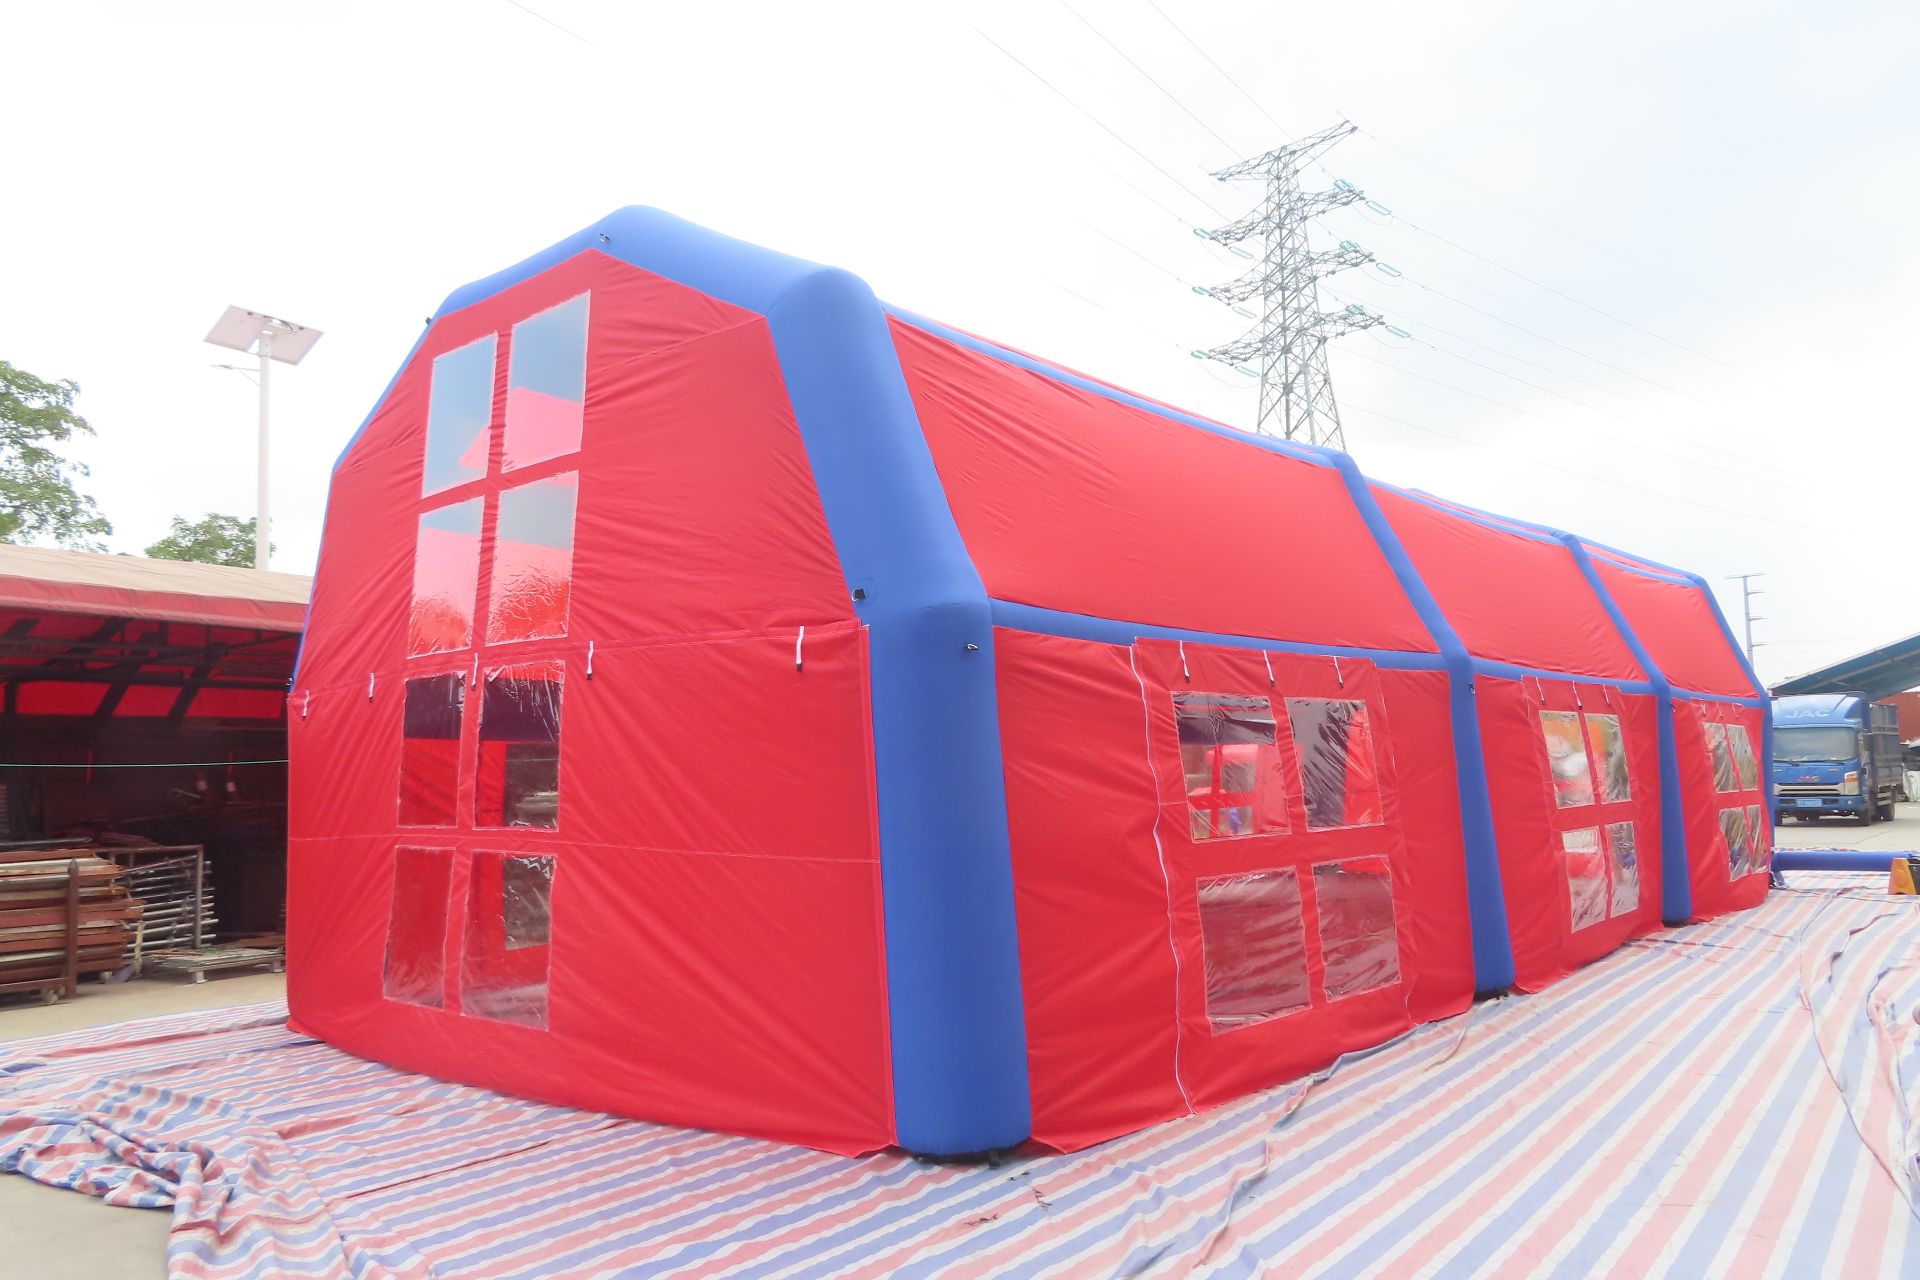 BRAND NEW LARGE INFLATABLE MARQUEE PARTY TENT - 15m x 6m x 4.5m - Image 6 of 9